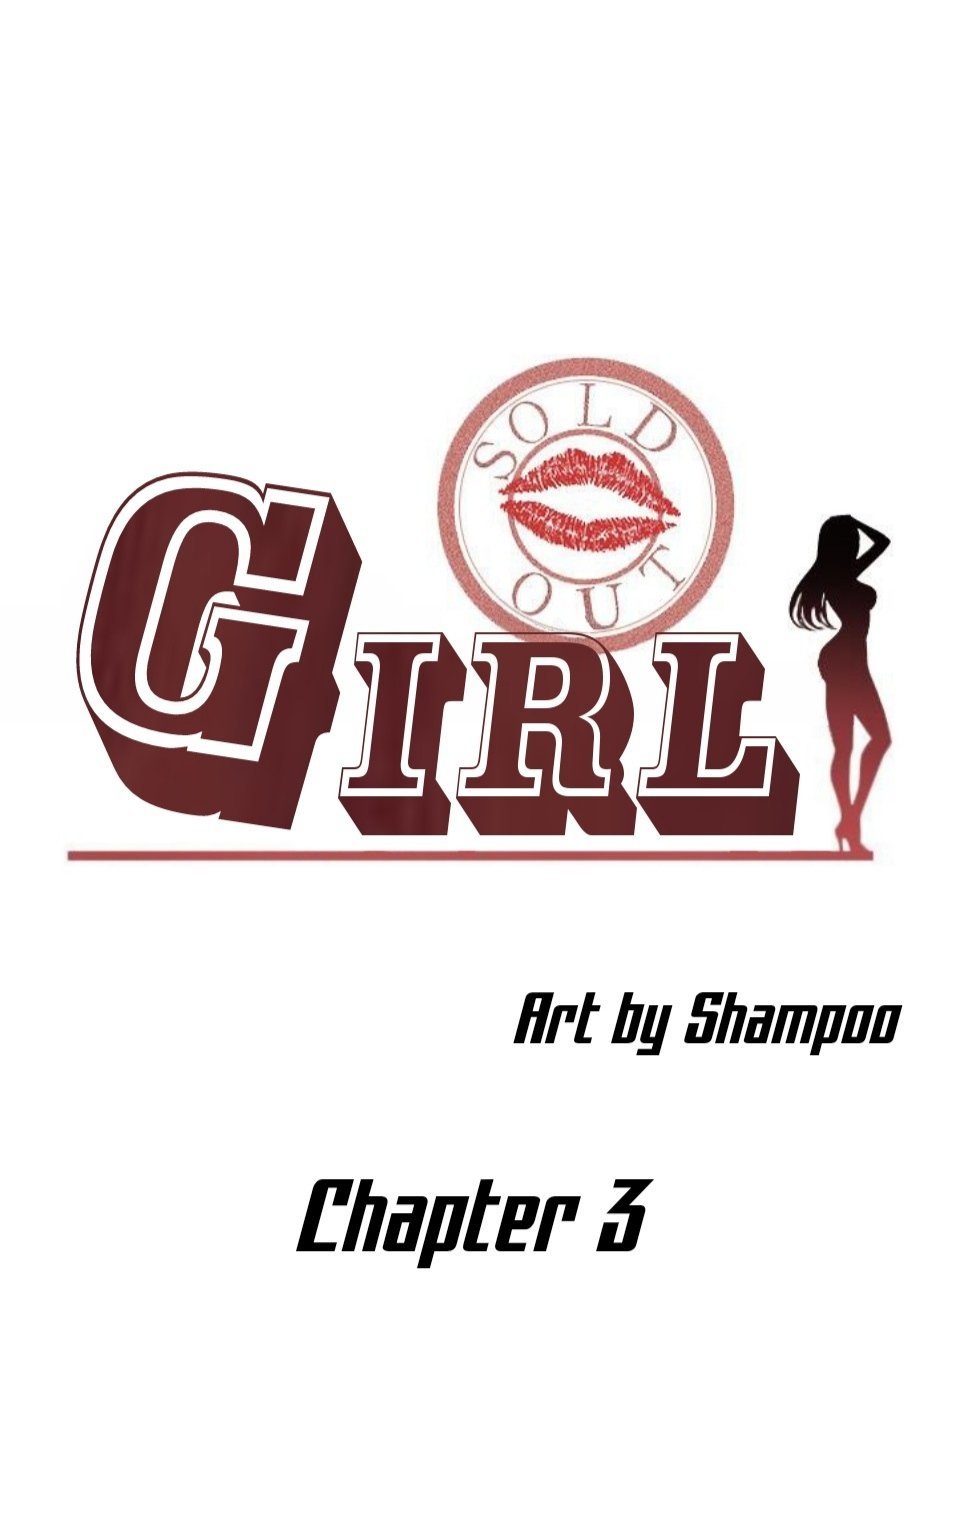 sold-out-girl-chap-3-2